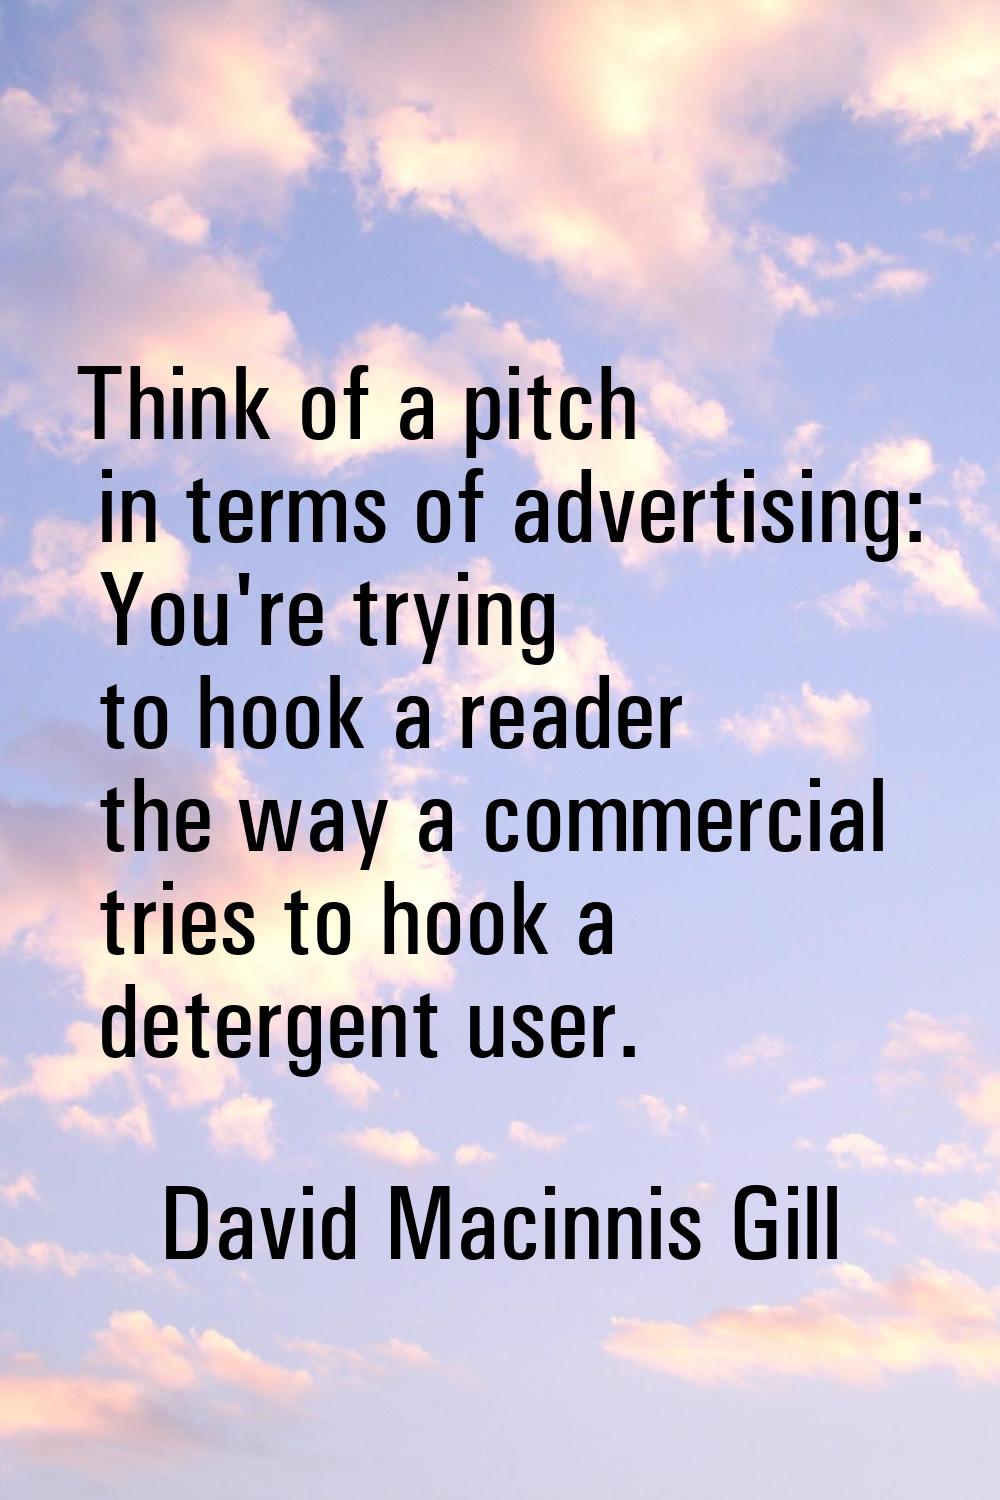 Think of a pitch in terms of advertising: You're trying to hook a reader the way a commercial tries